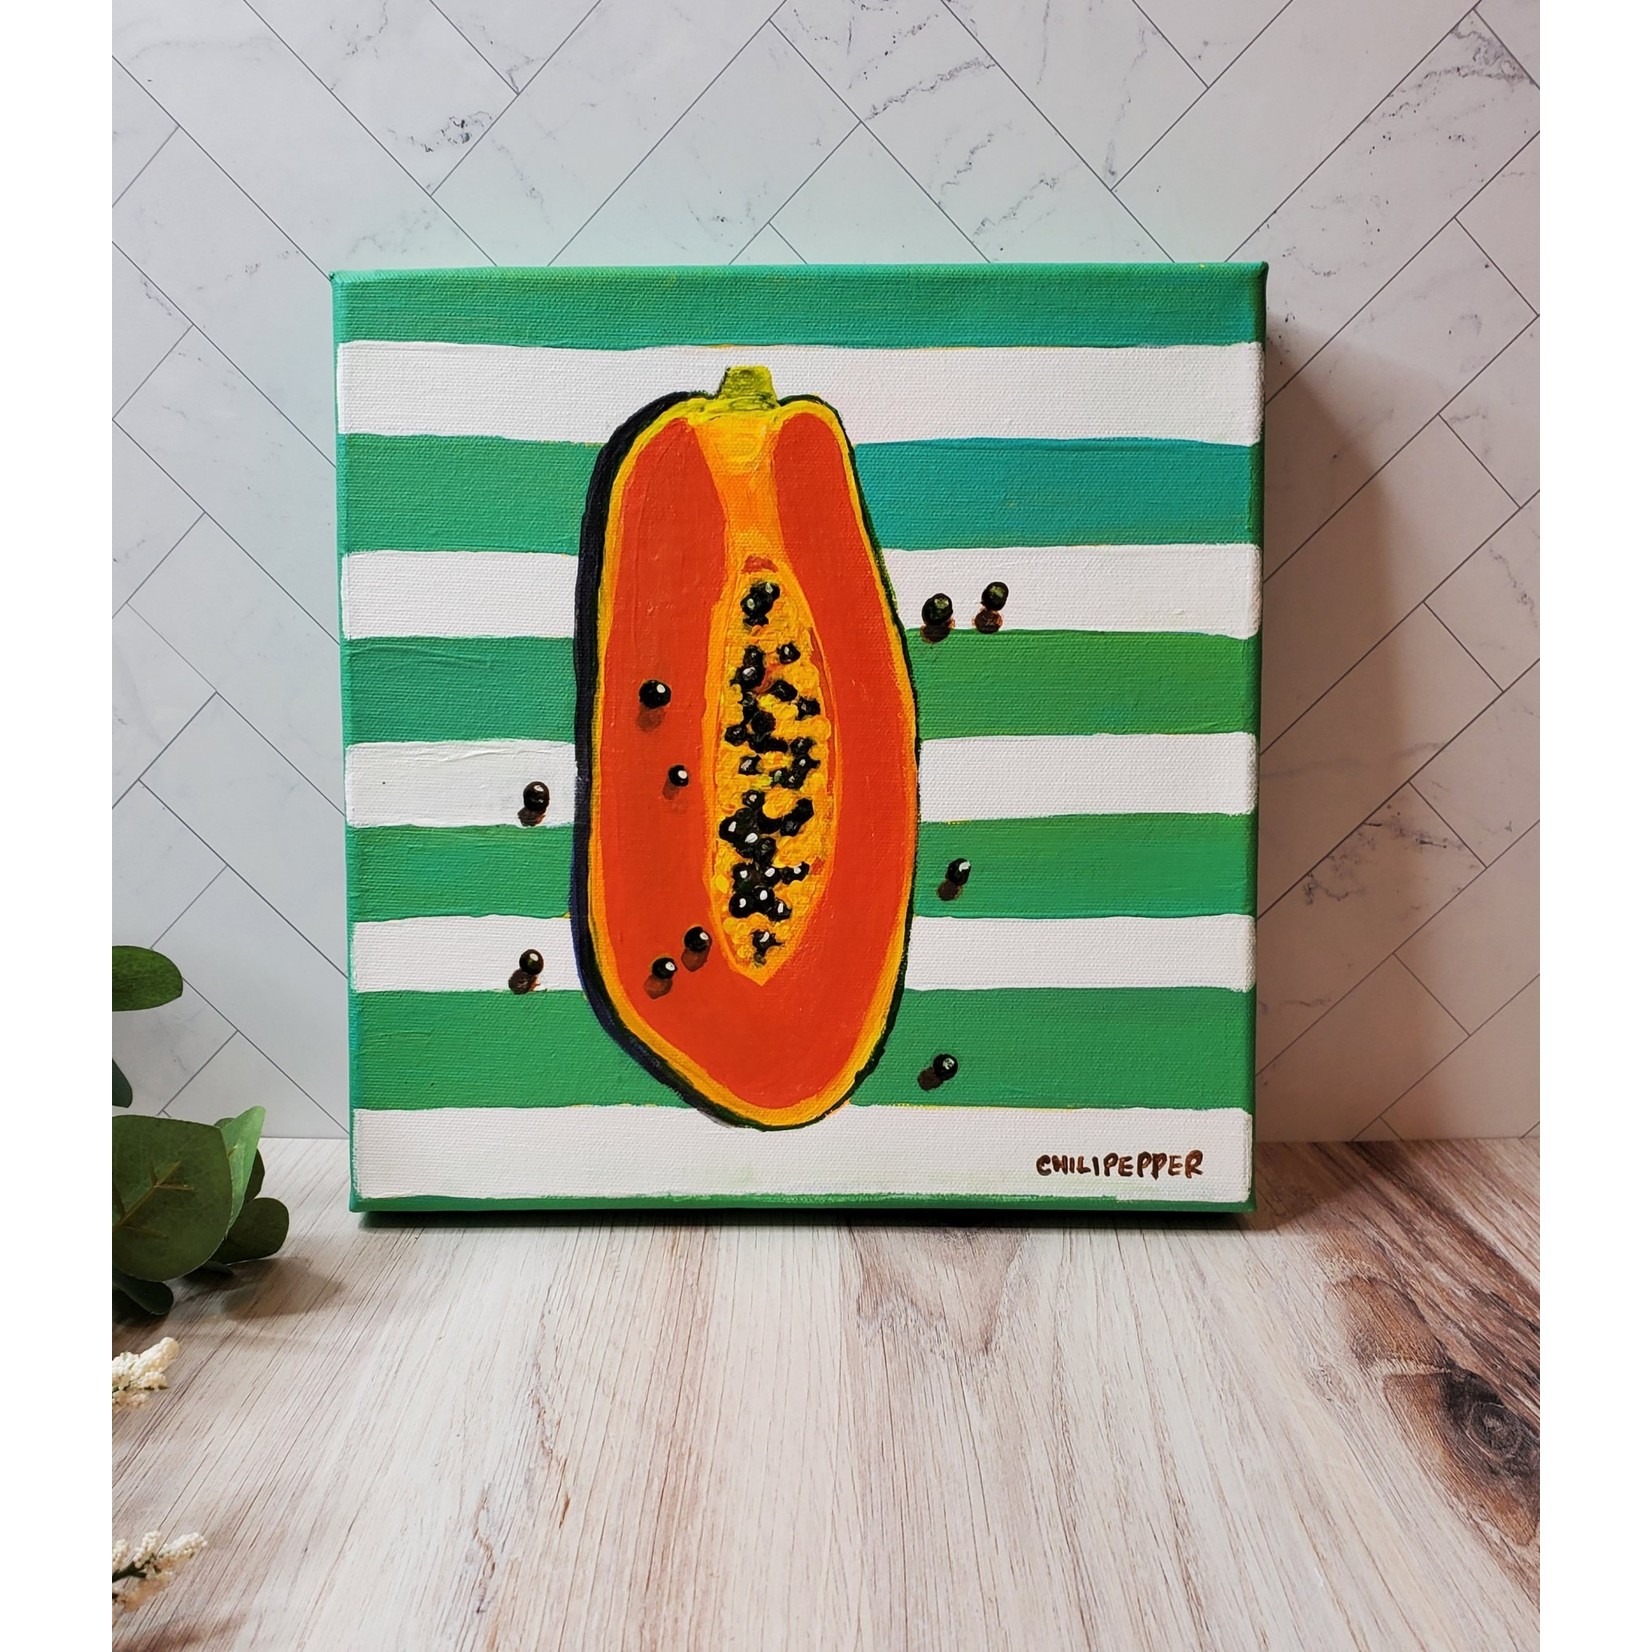 Chilipepper's Painting "During Summer Heat (Papaya)" - Acrylic on canvas